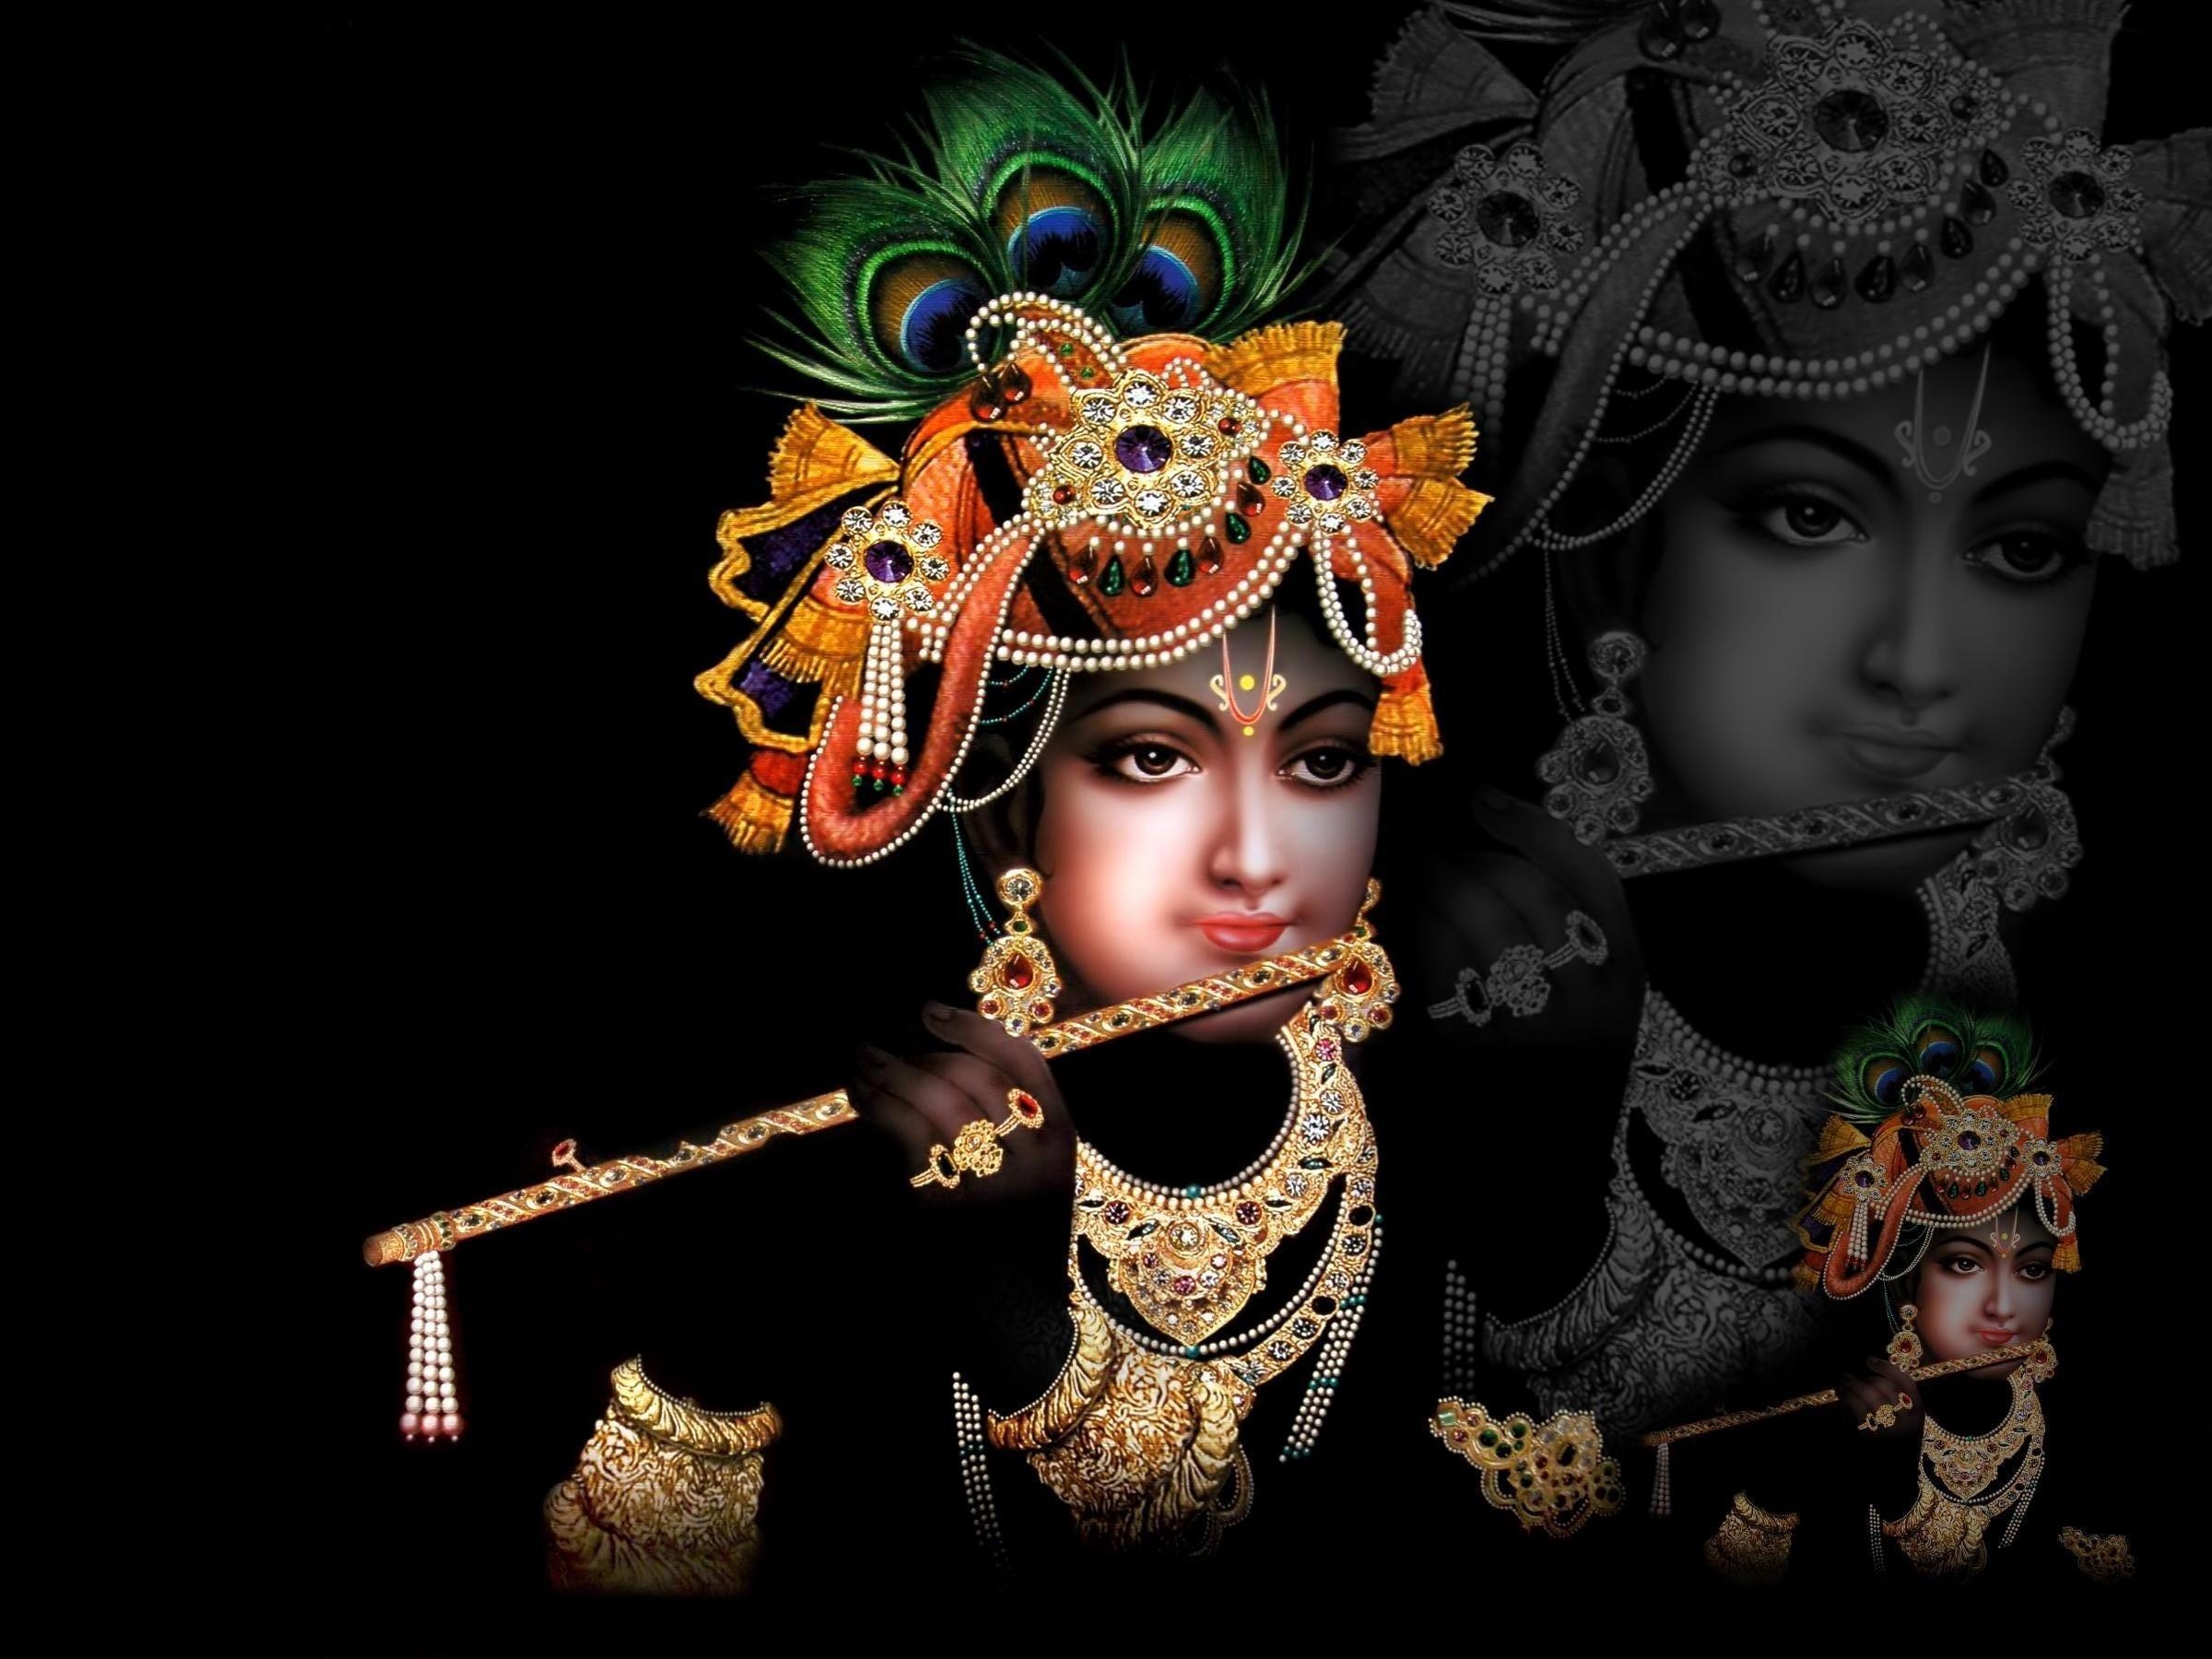 2400x1800 Search Results for “lord krishna wallpapers with black background” –  Adorable Wallpapers